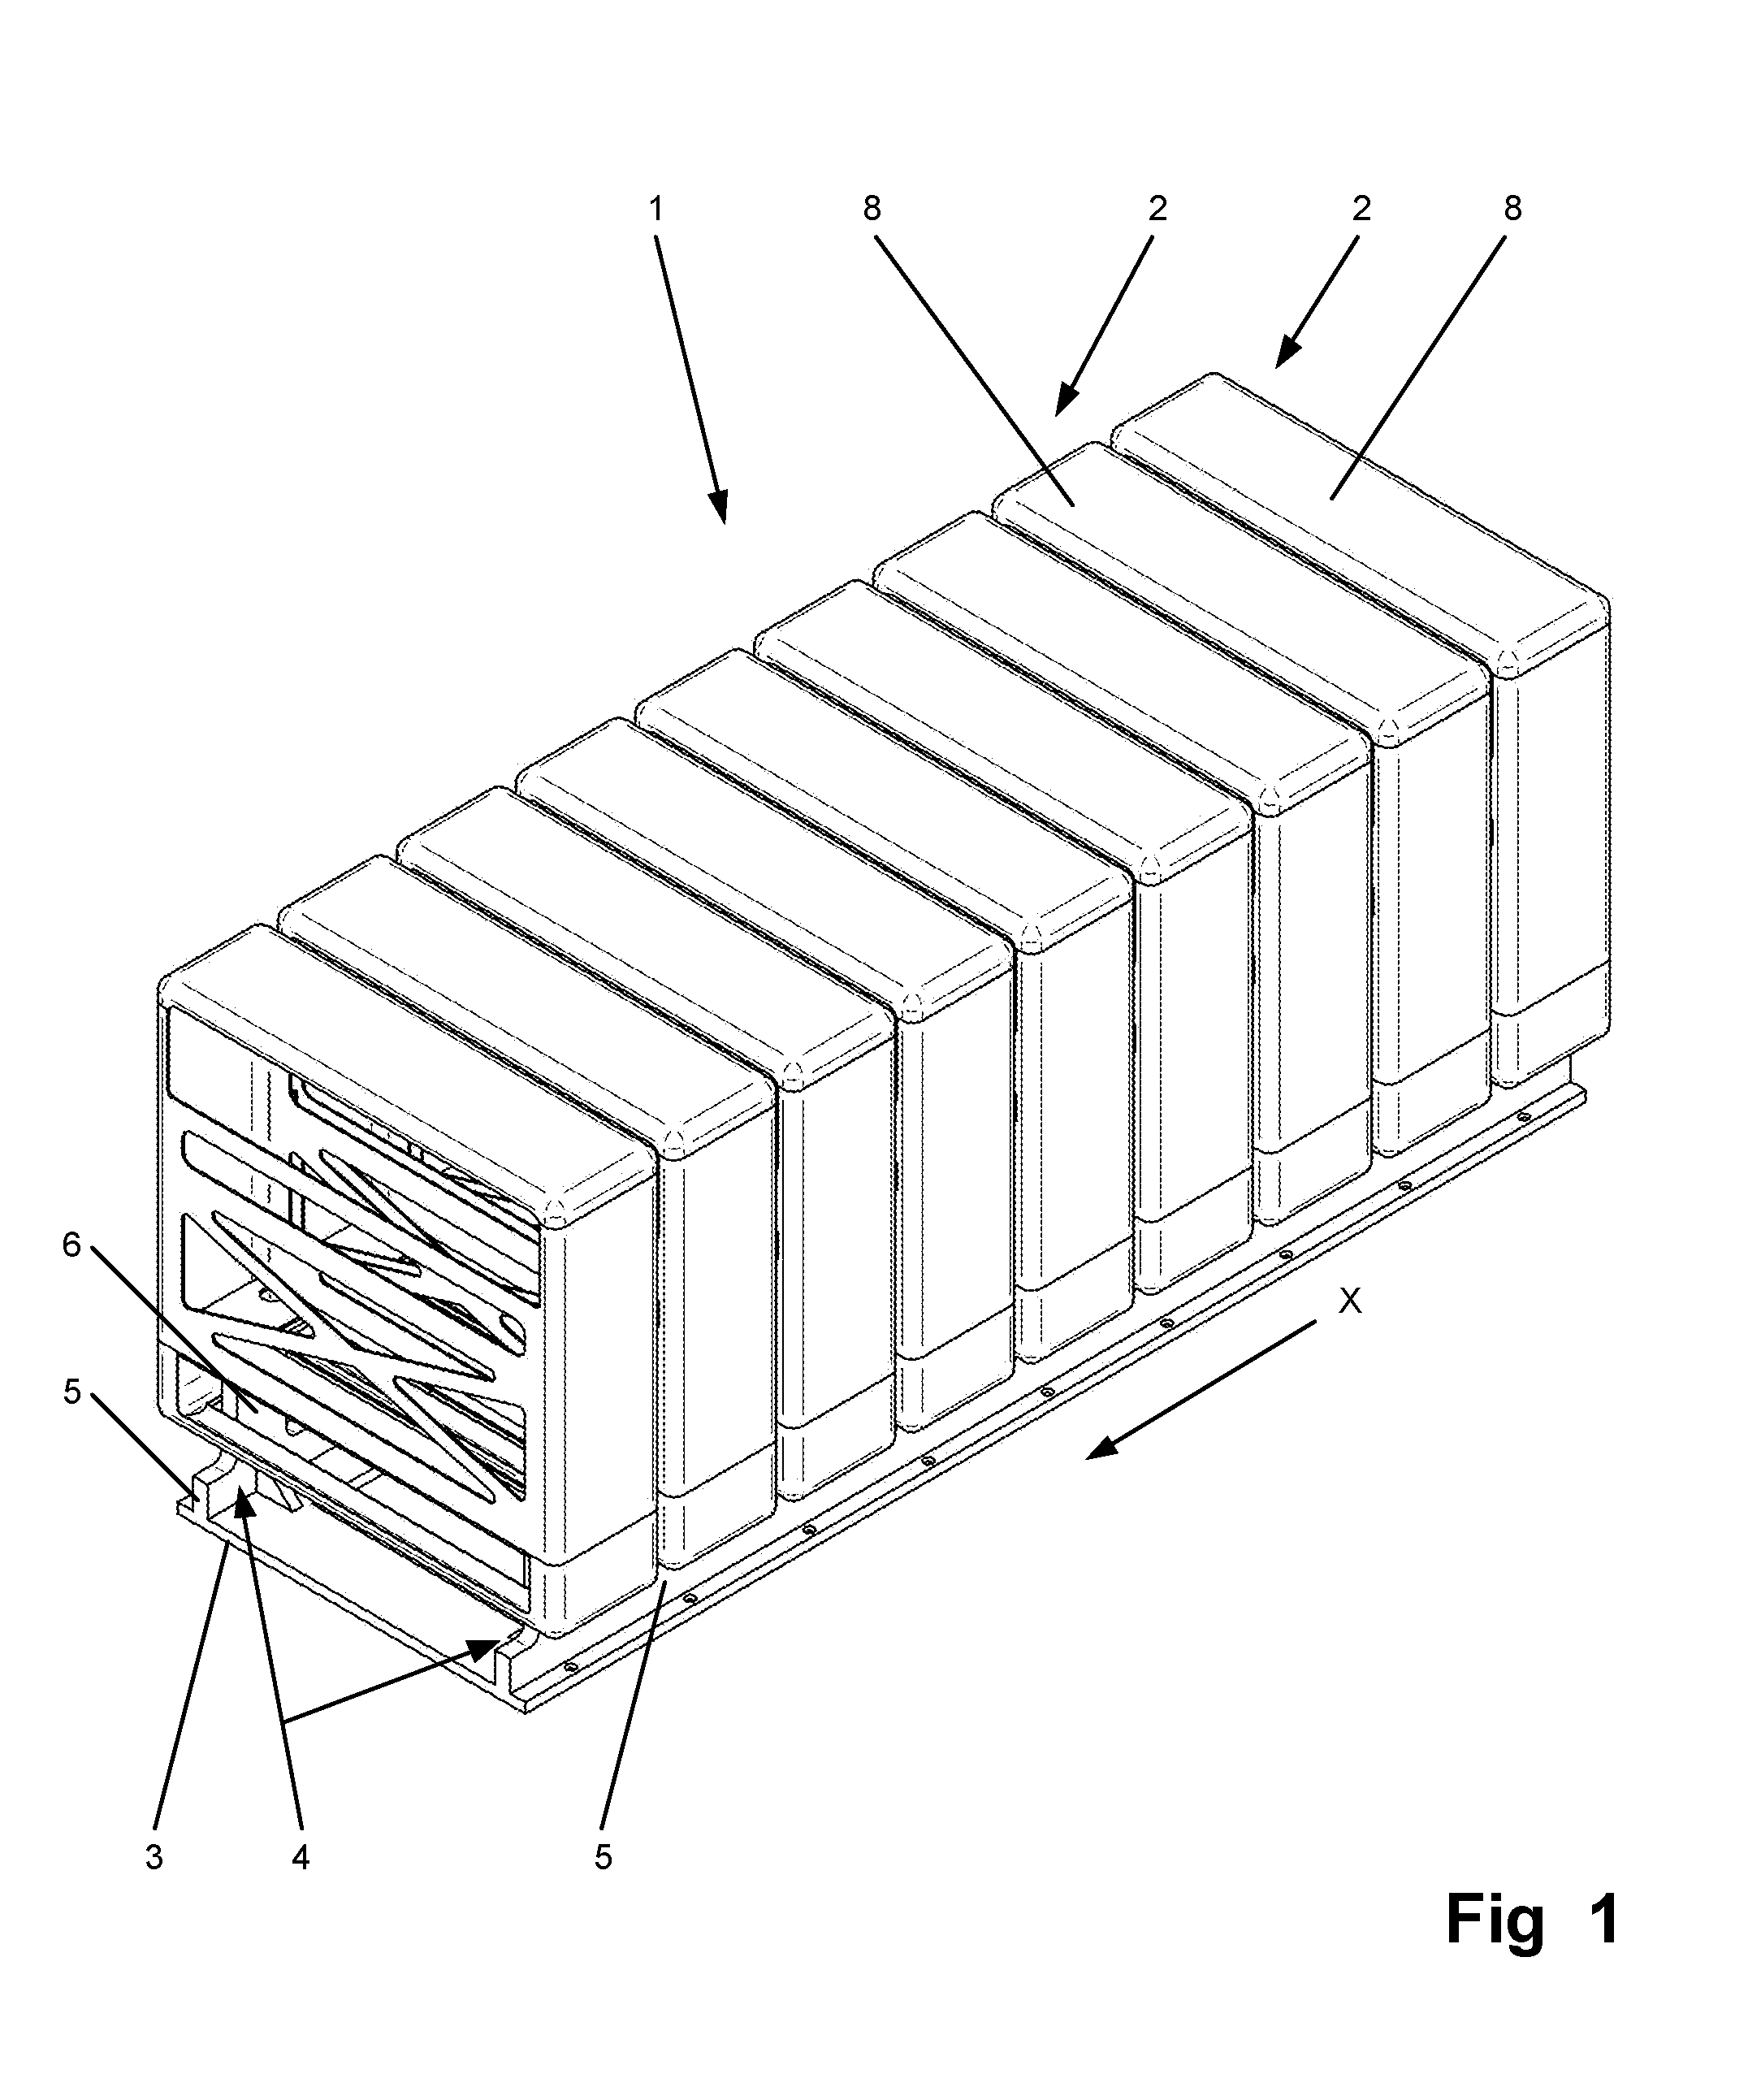 Power electronic switching system